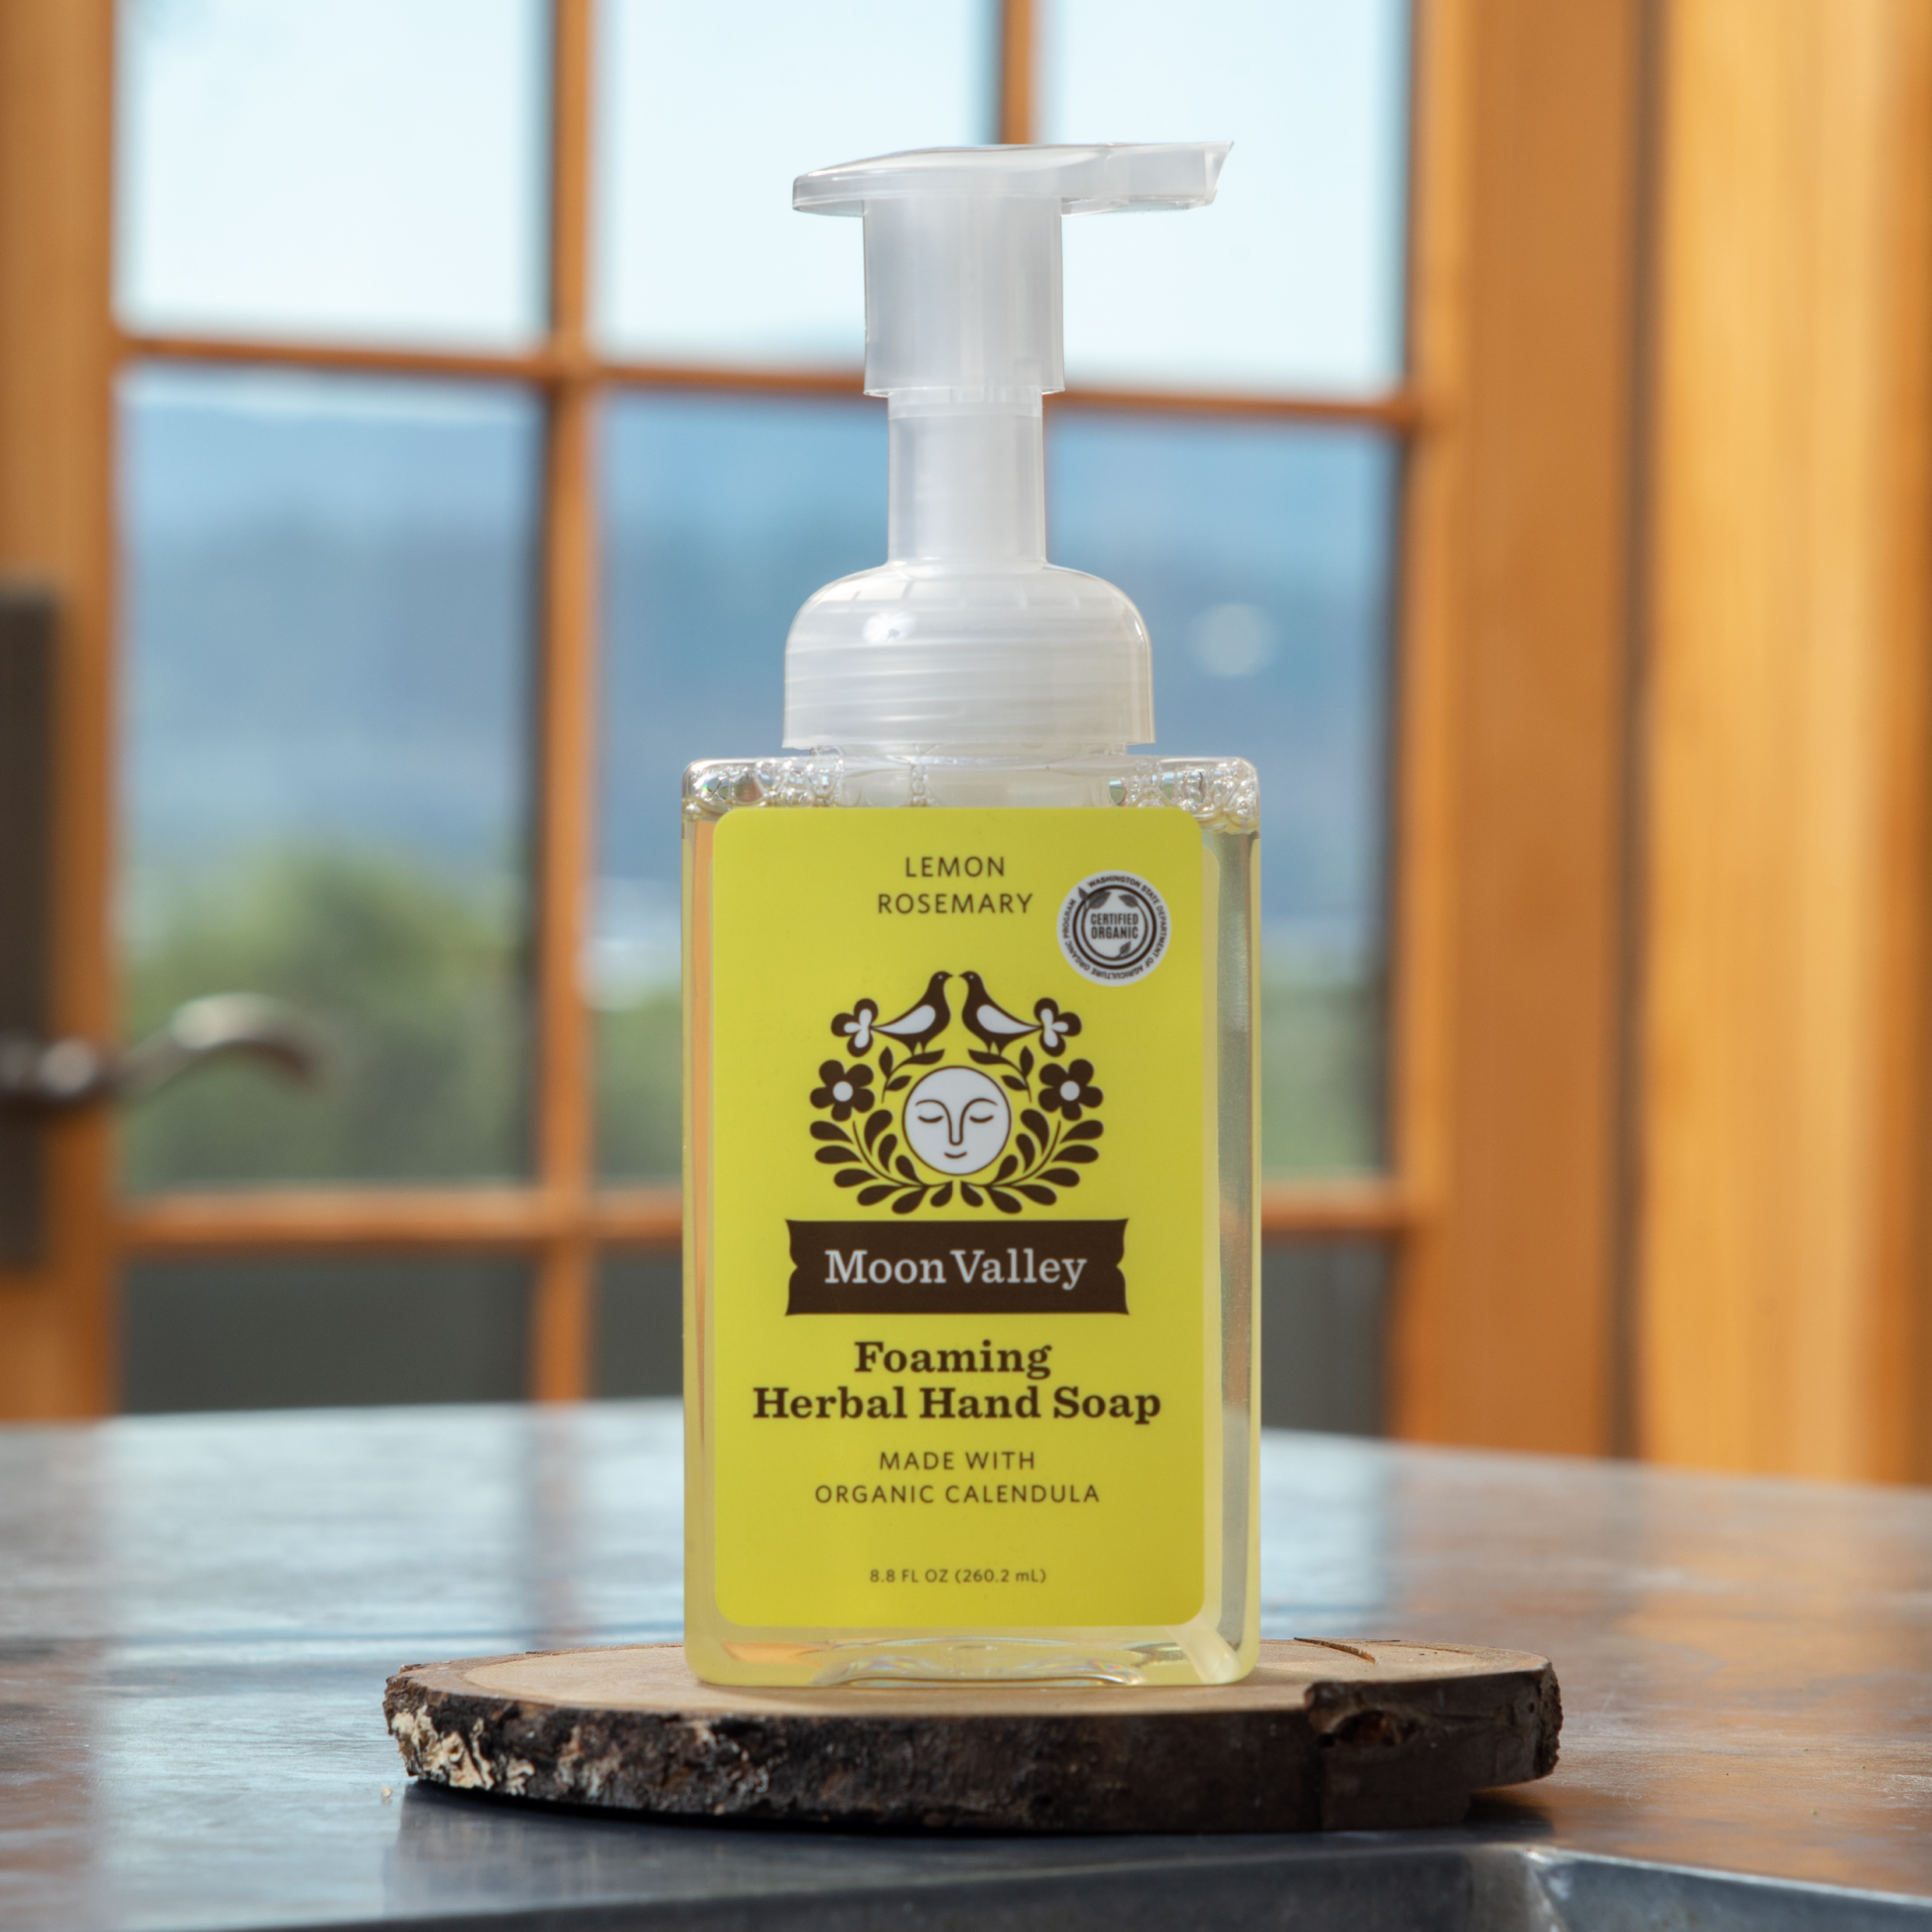 Moon Valley Organics Foaming Herbal Hand Soap Front Dispenser Bottle Lemon Rosemary sitting on a wooden coaster on a kitchen sink